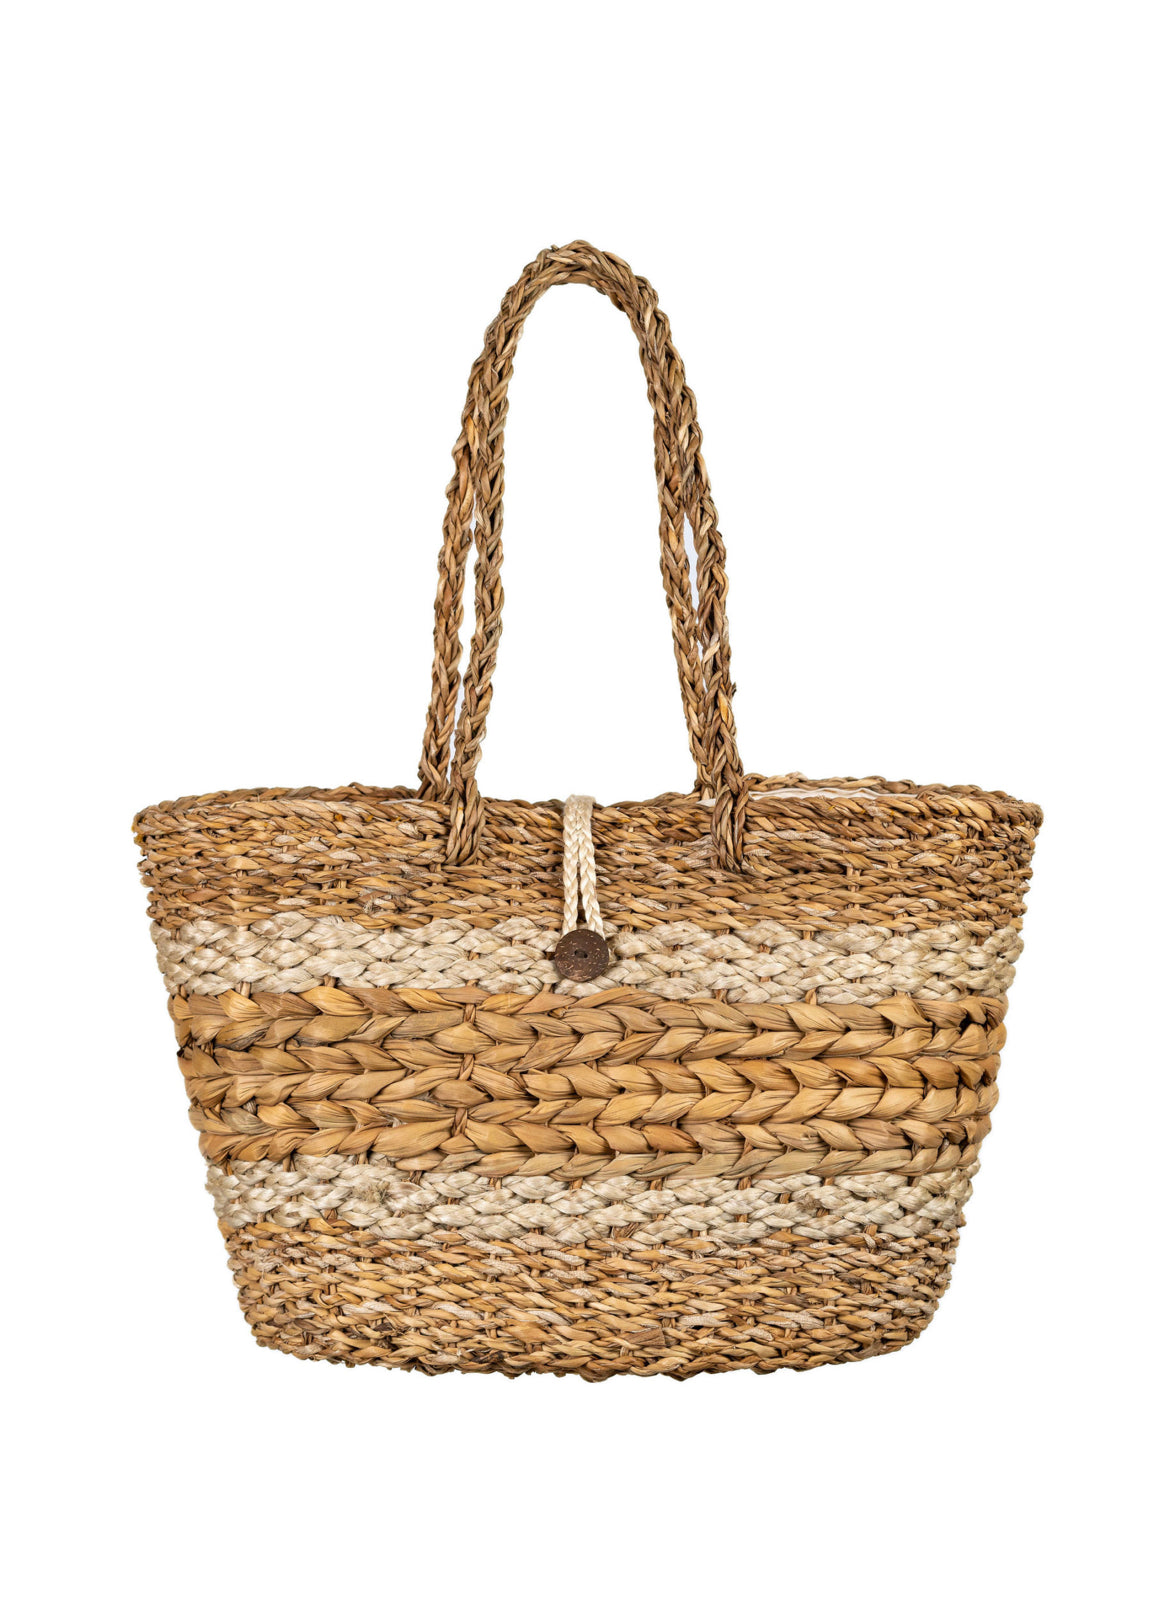 Turtle Bags - Seagrass Basket